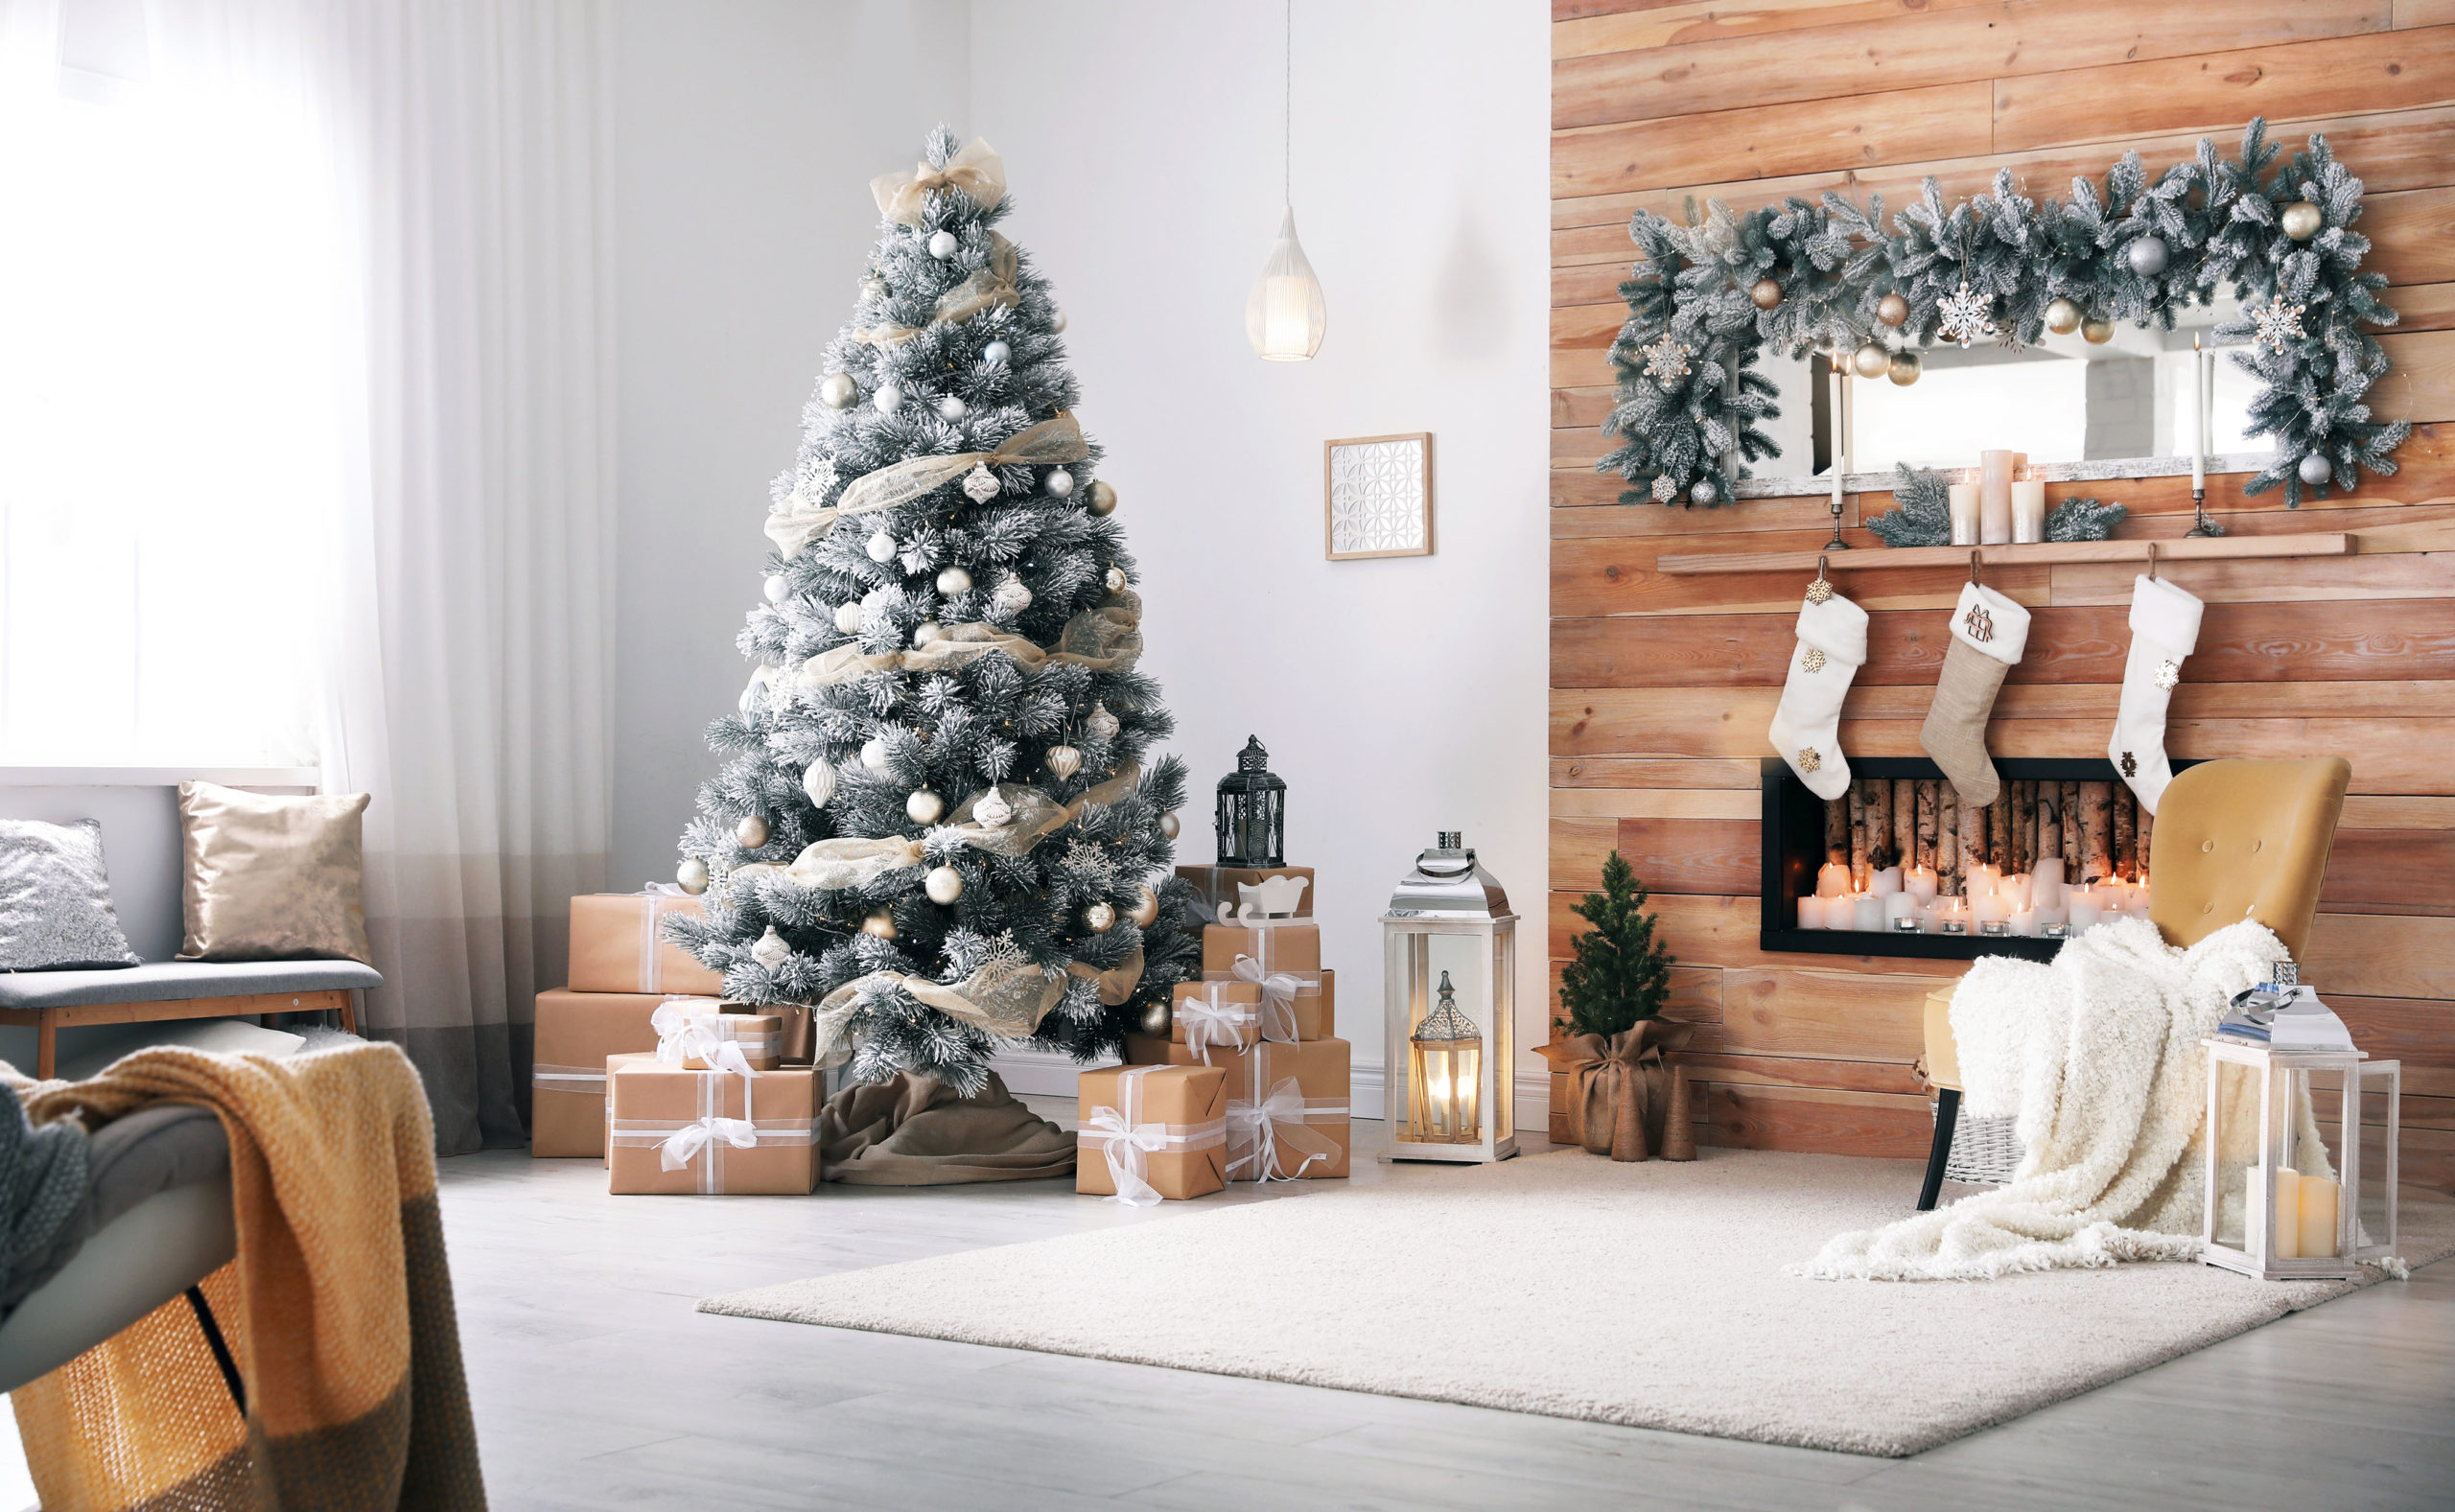 Mark Roemer image of a Christmas tree and fireplace